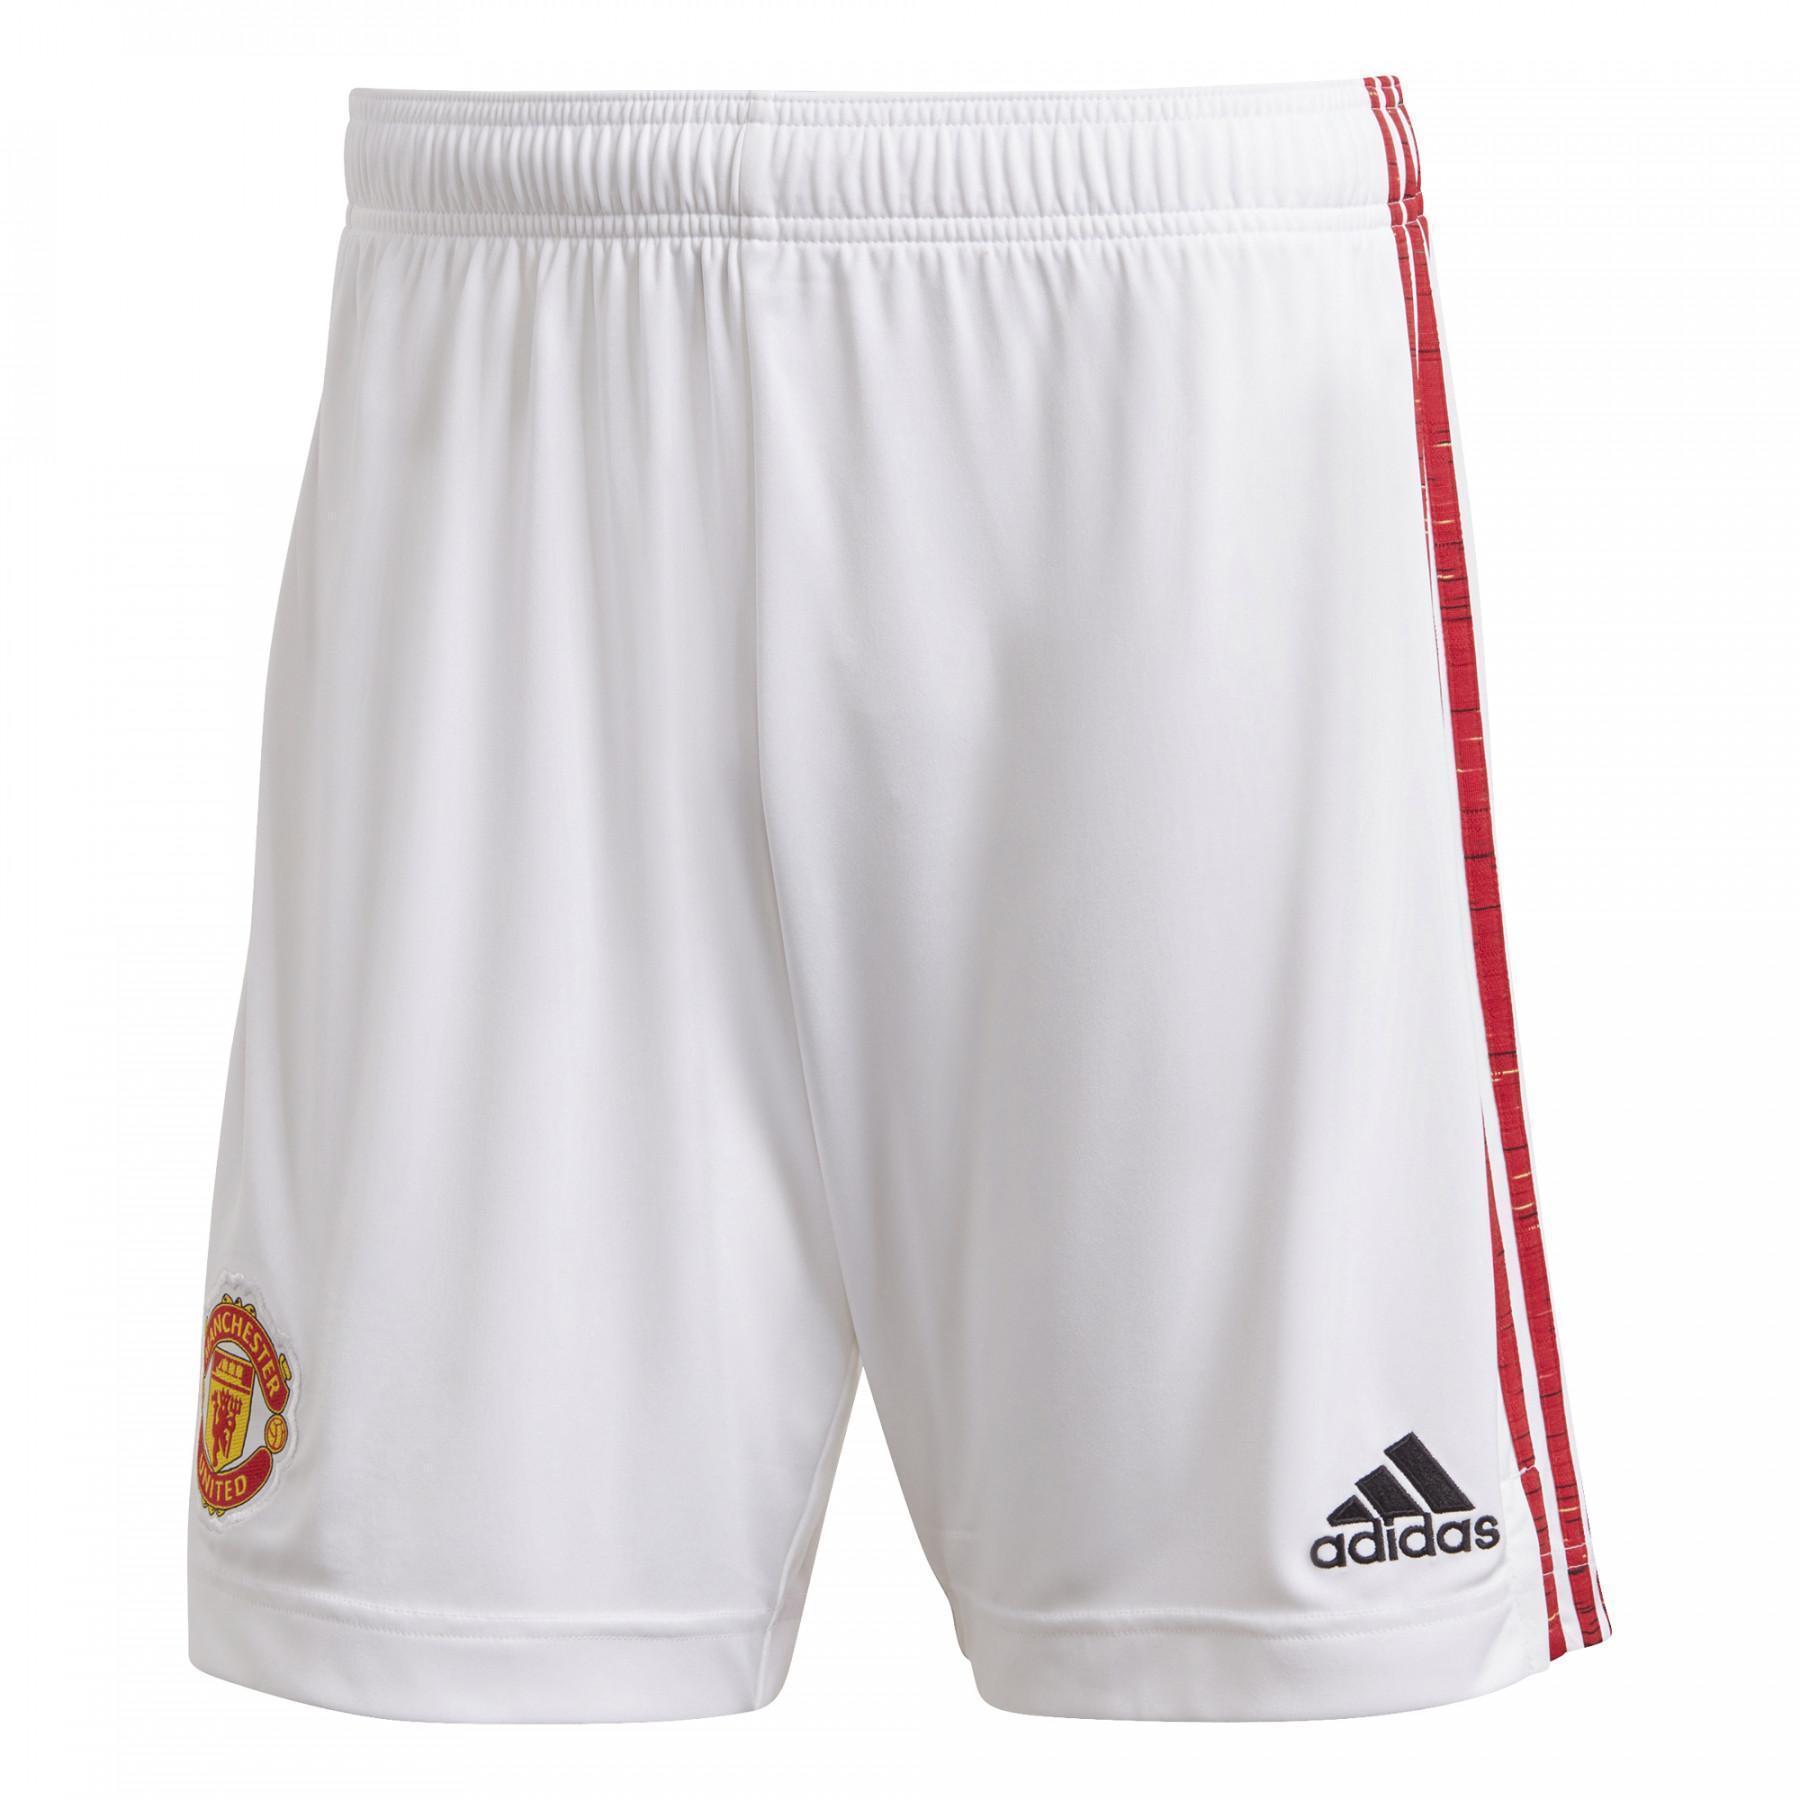 Home shorts Manchester United 2020/21